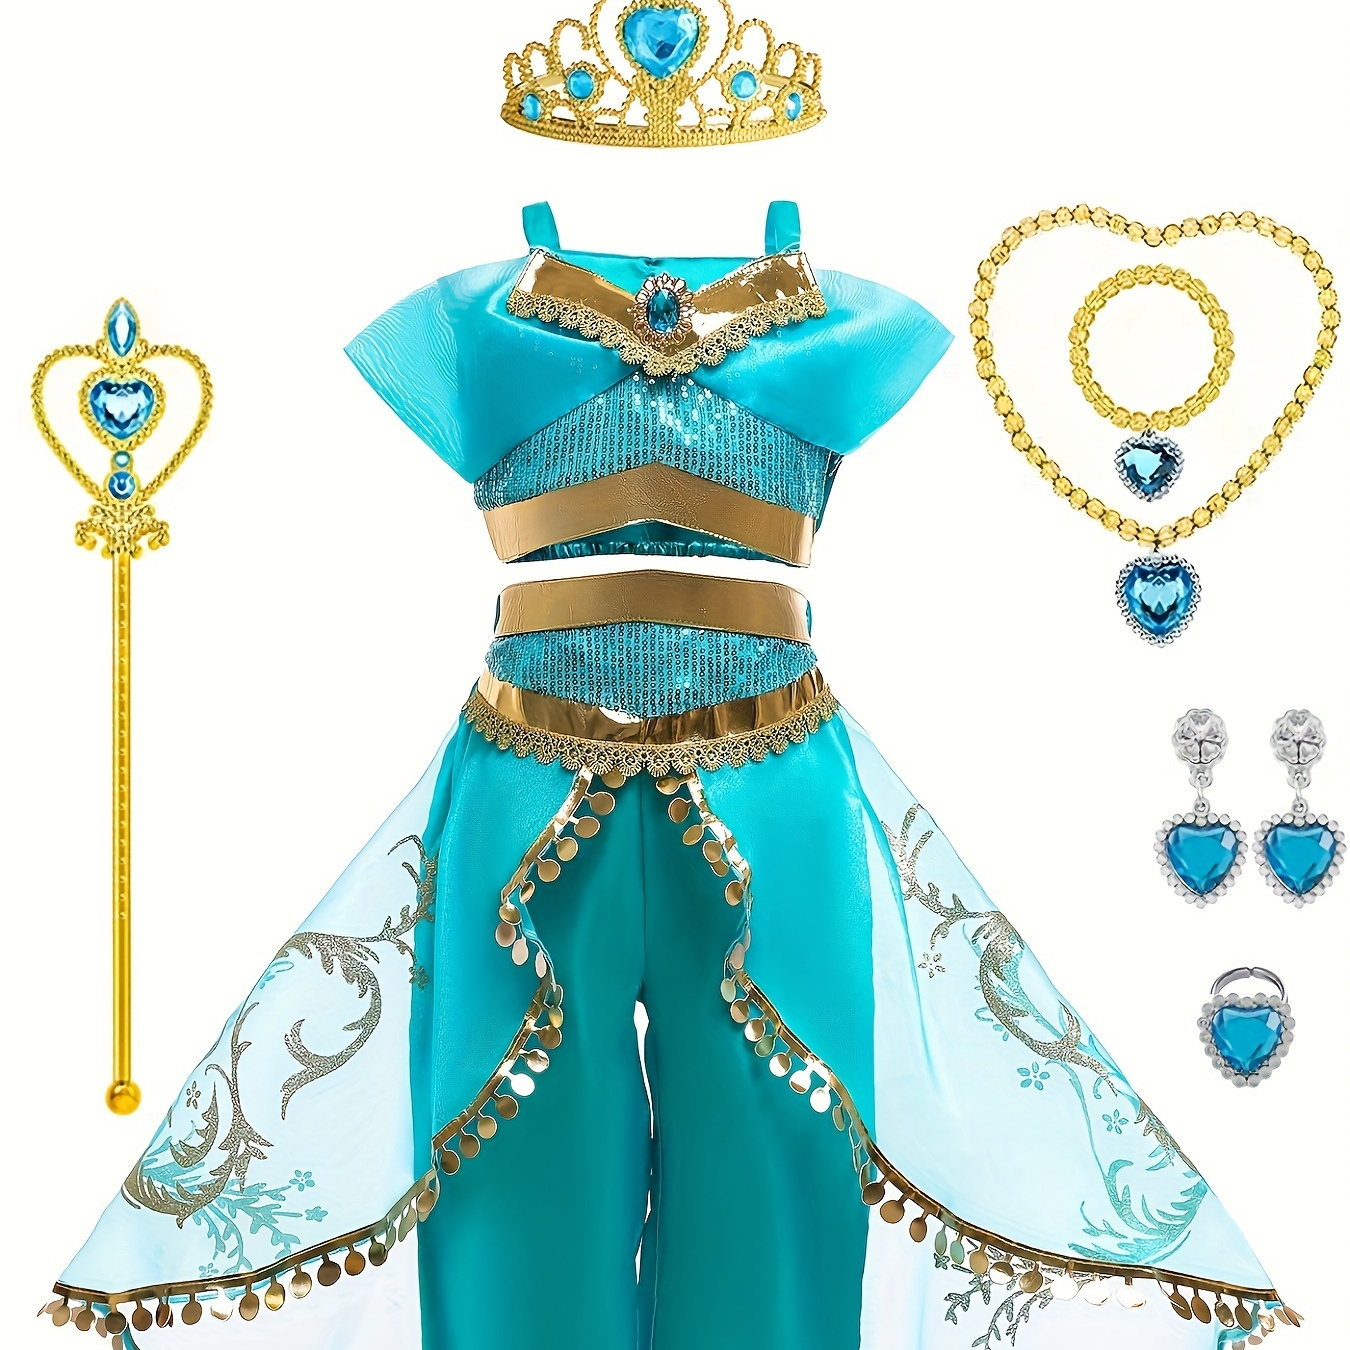 

Girls Cartoon Themed Party Dress Up Outfit, Fake Jewel Applique Strap Top & Mesh Overlay Trousers & Accessories, Girls Princess Clothing For Halloween